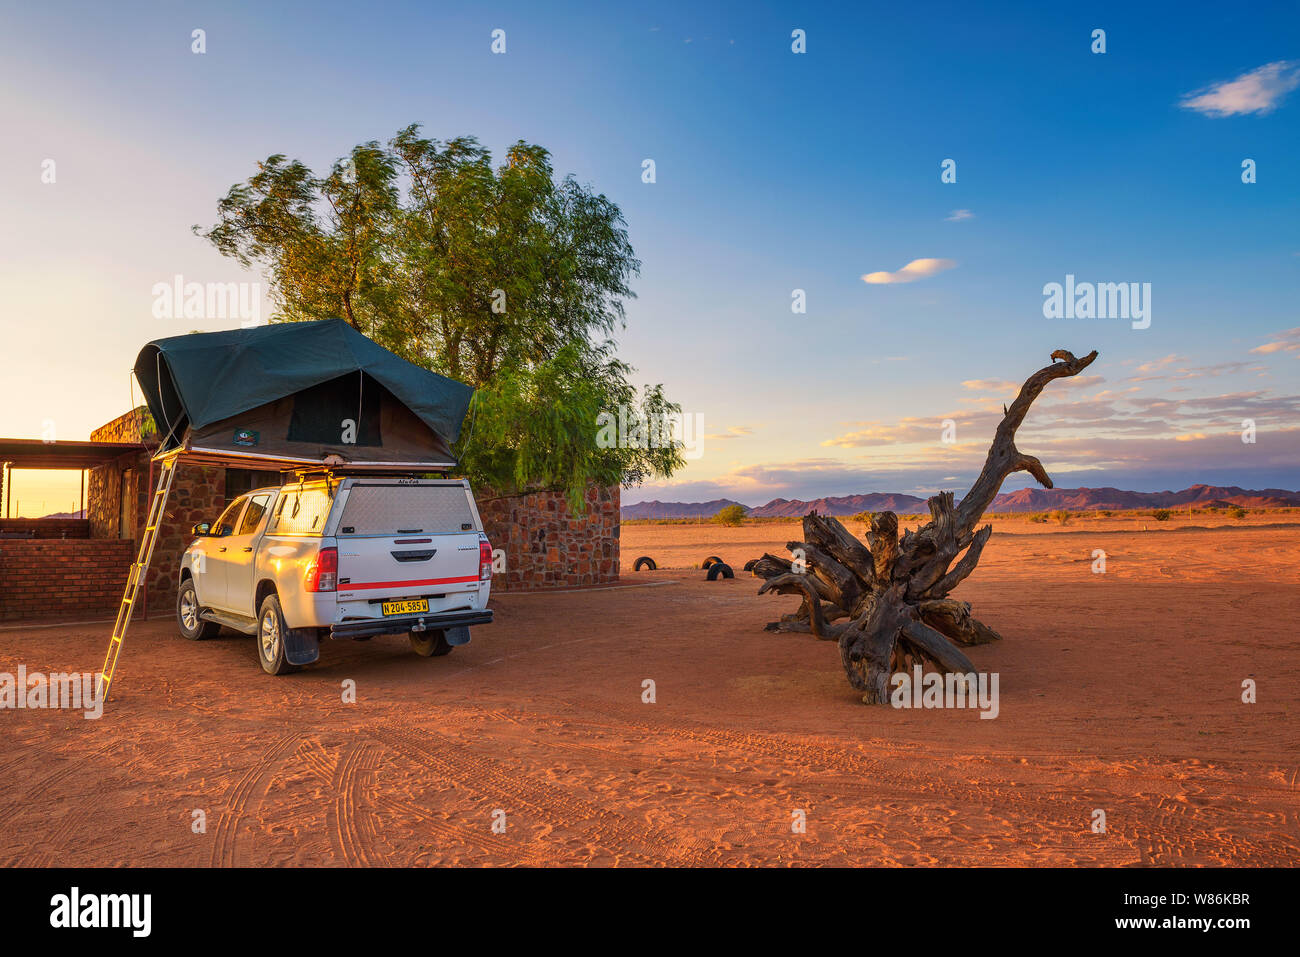 Tent located on the roof of a pickup 4x4 car in a desert camp, Namibia Stock Photo